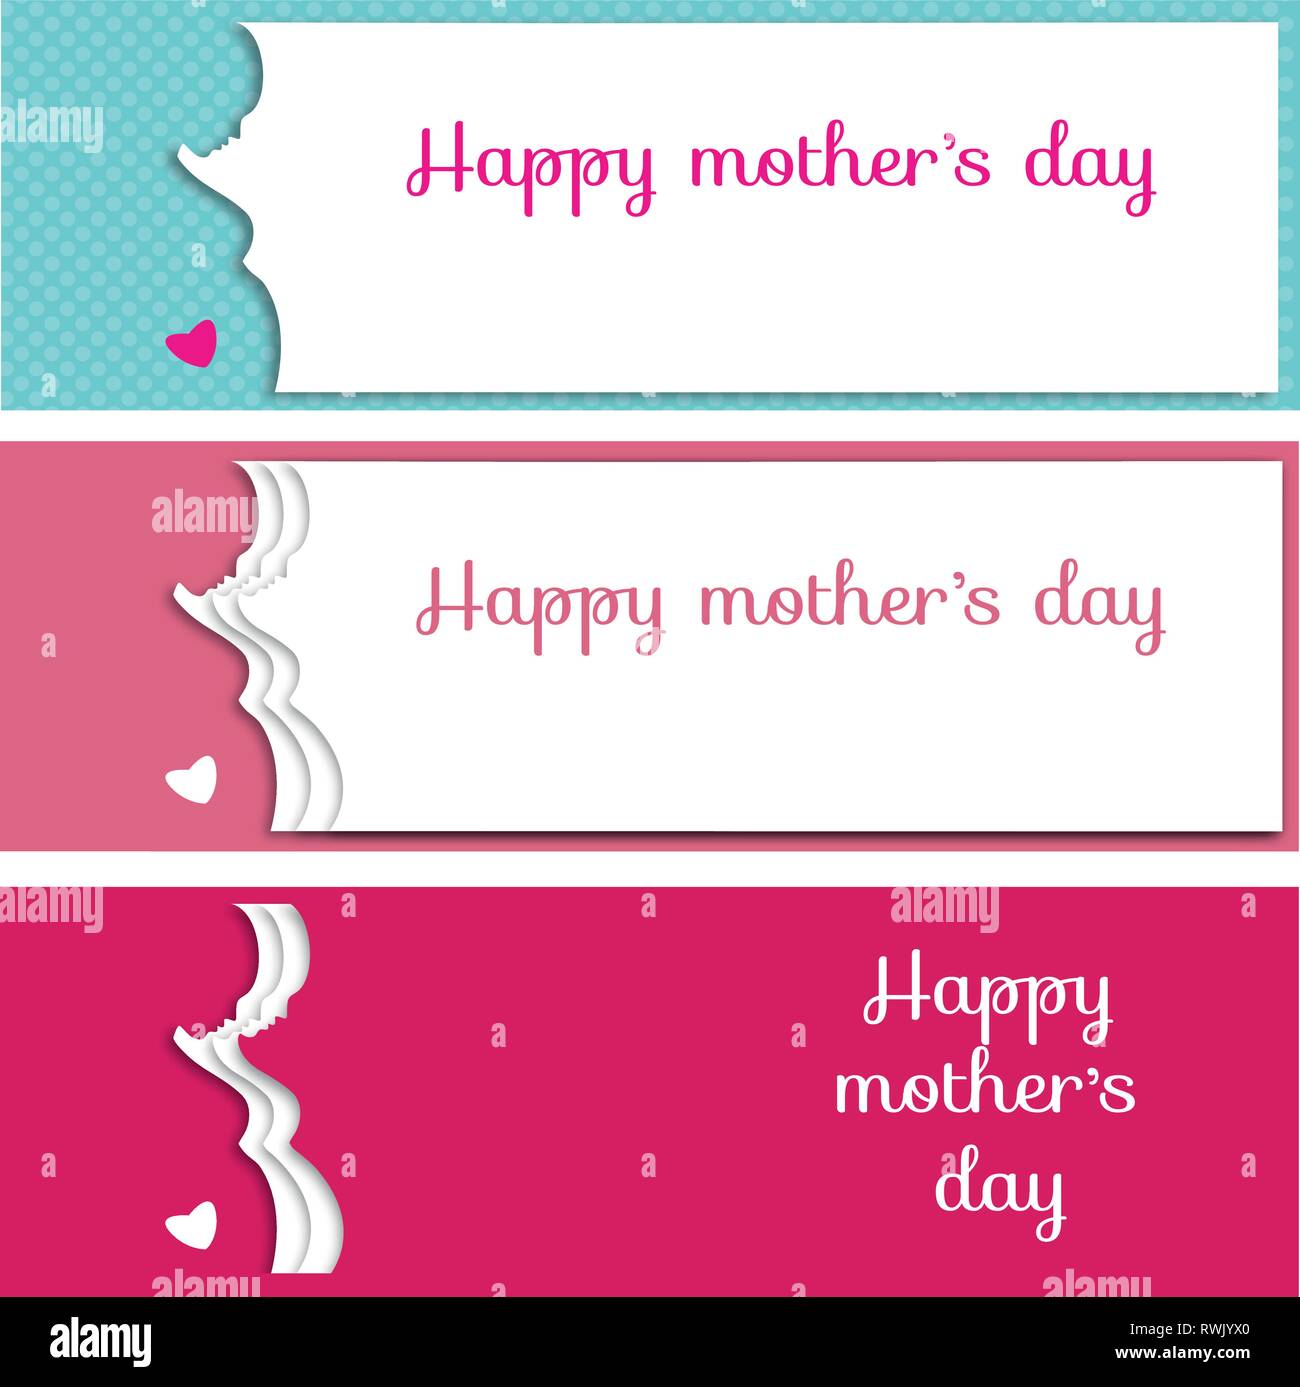 Mothers day vectors. Pregnant woman cutout. Mothers day banners. Stock Vector